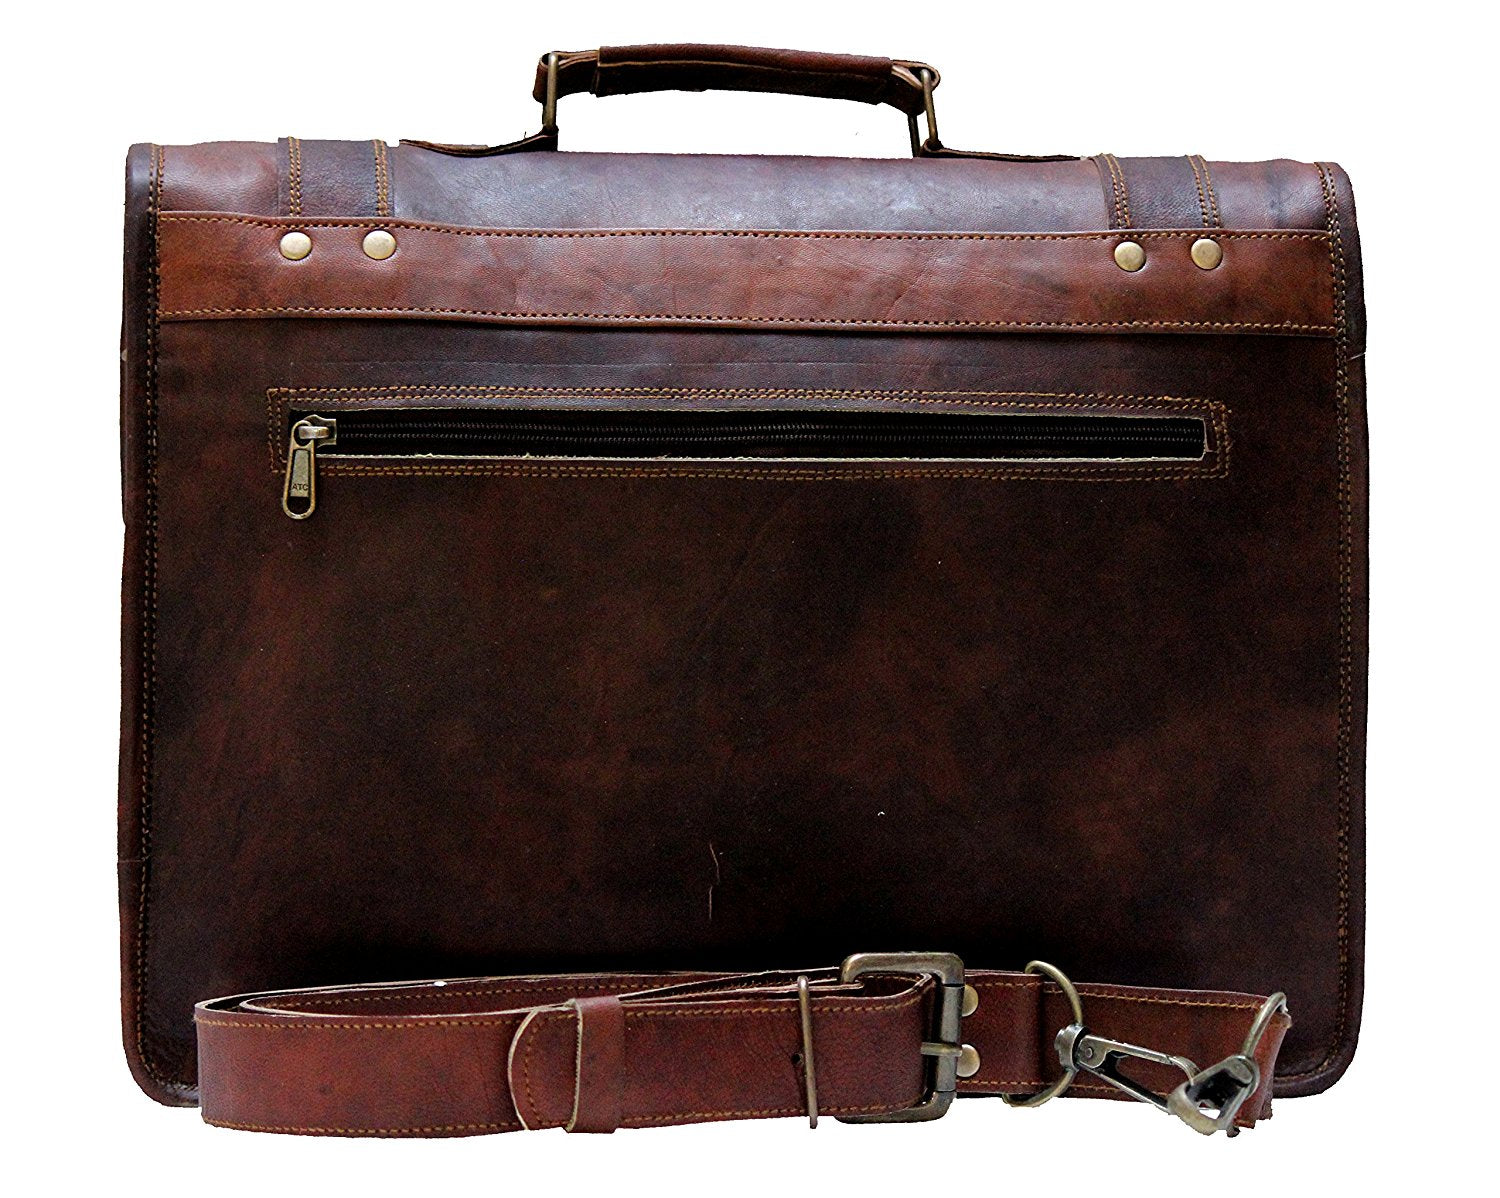 Brown Leather Messenger Bag with Top Handle and Adjustable Strap 